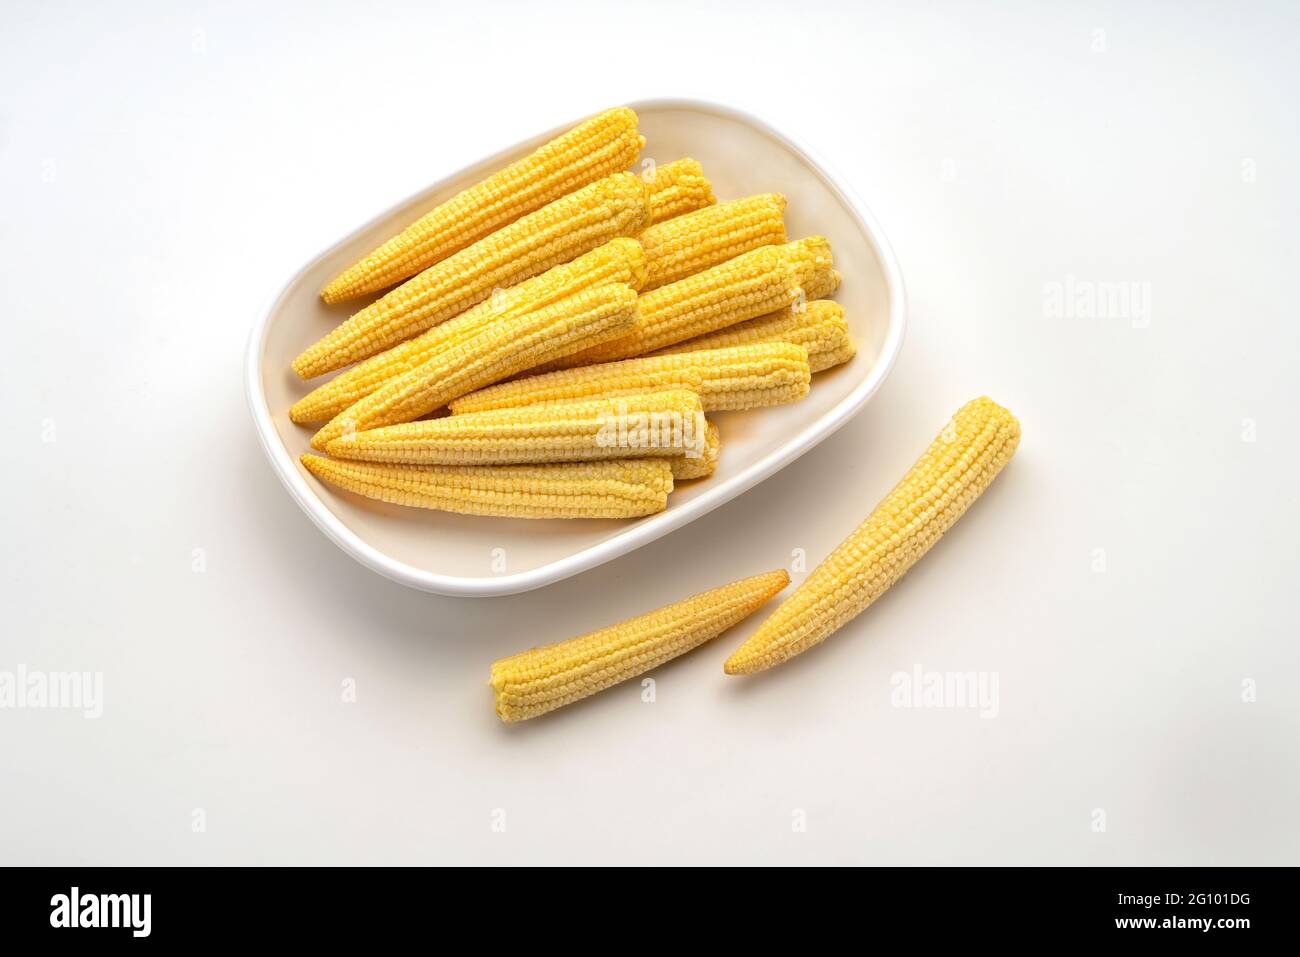 Closeup top view showing Baby Sweet Corn,Maize,Zea Mays in white ceramic dish displayed against white background, Stock Photo